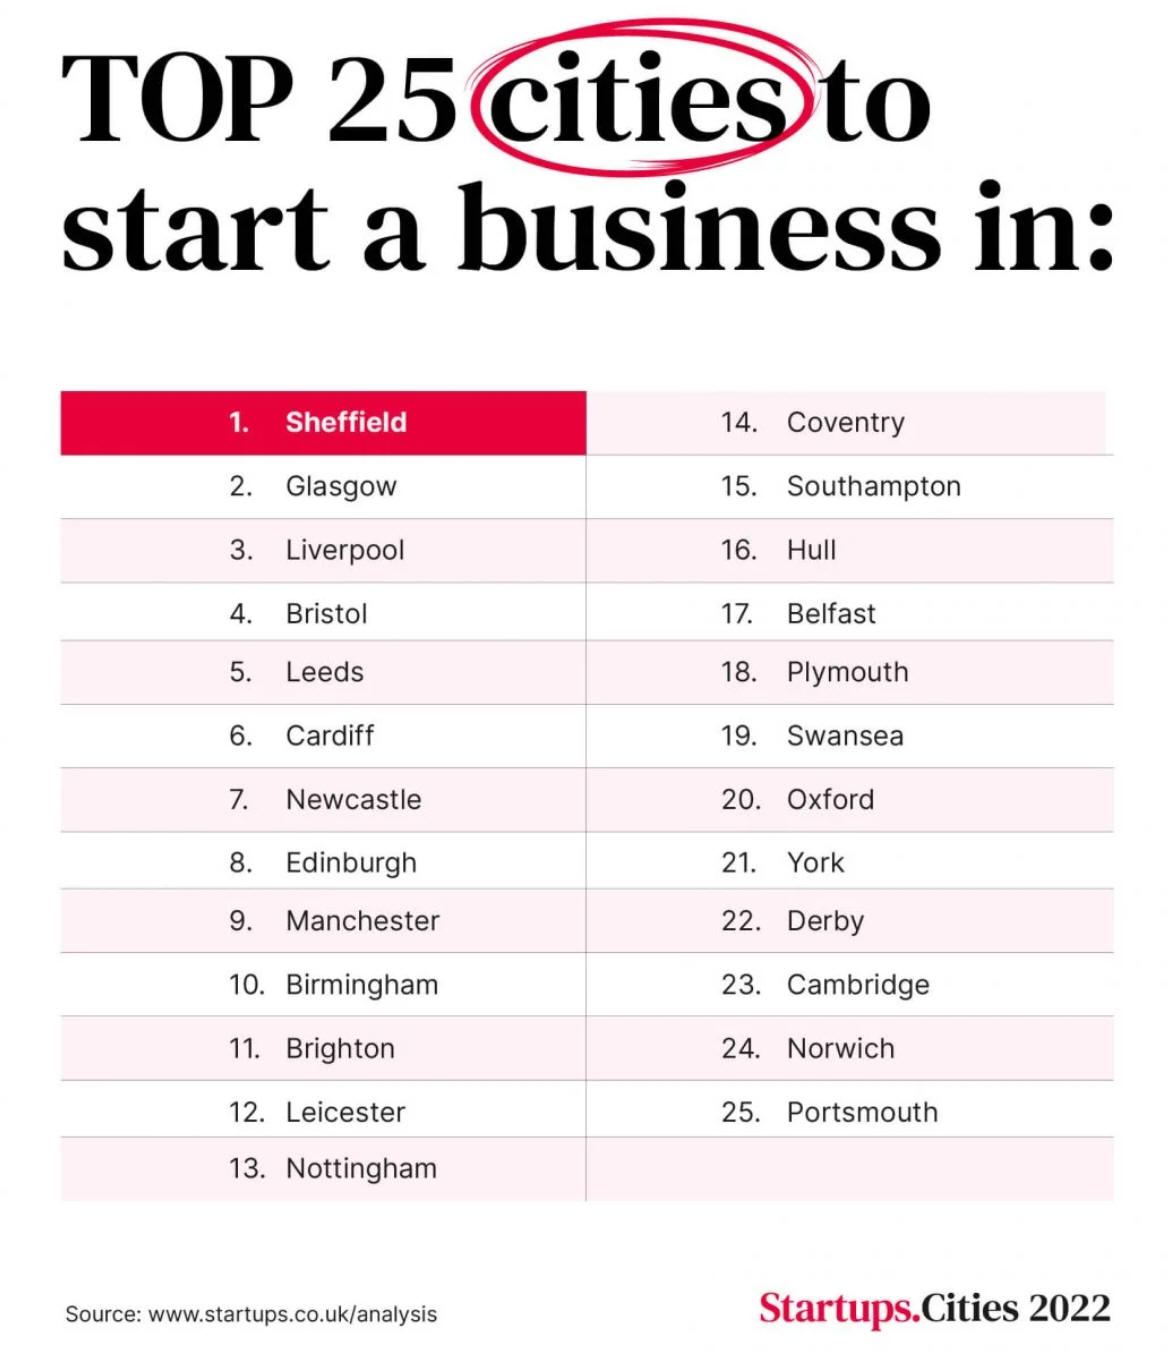 top_25_cities_to_start_a_business_in_2022_overall_list.jpg